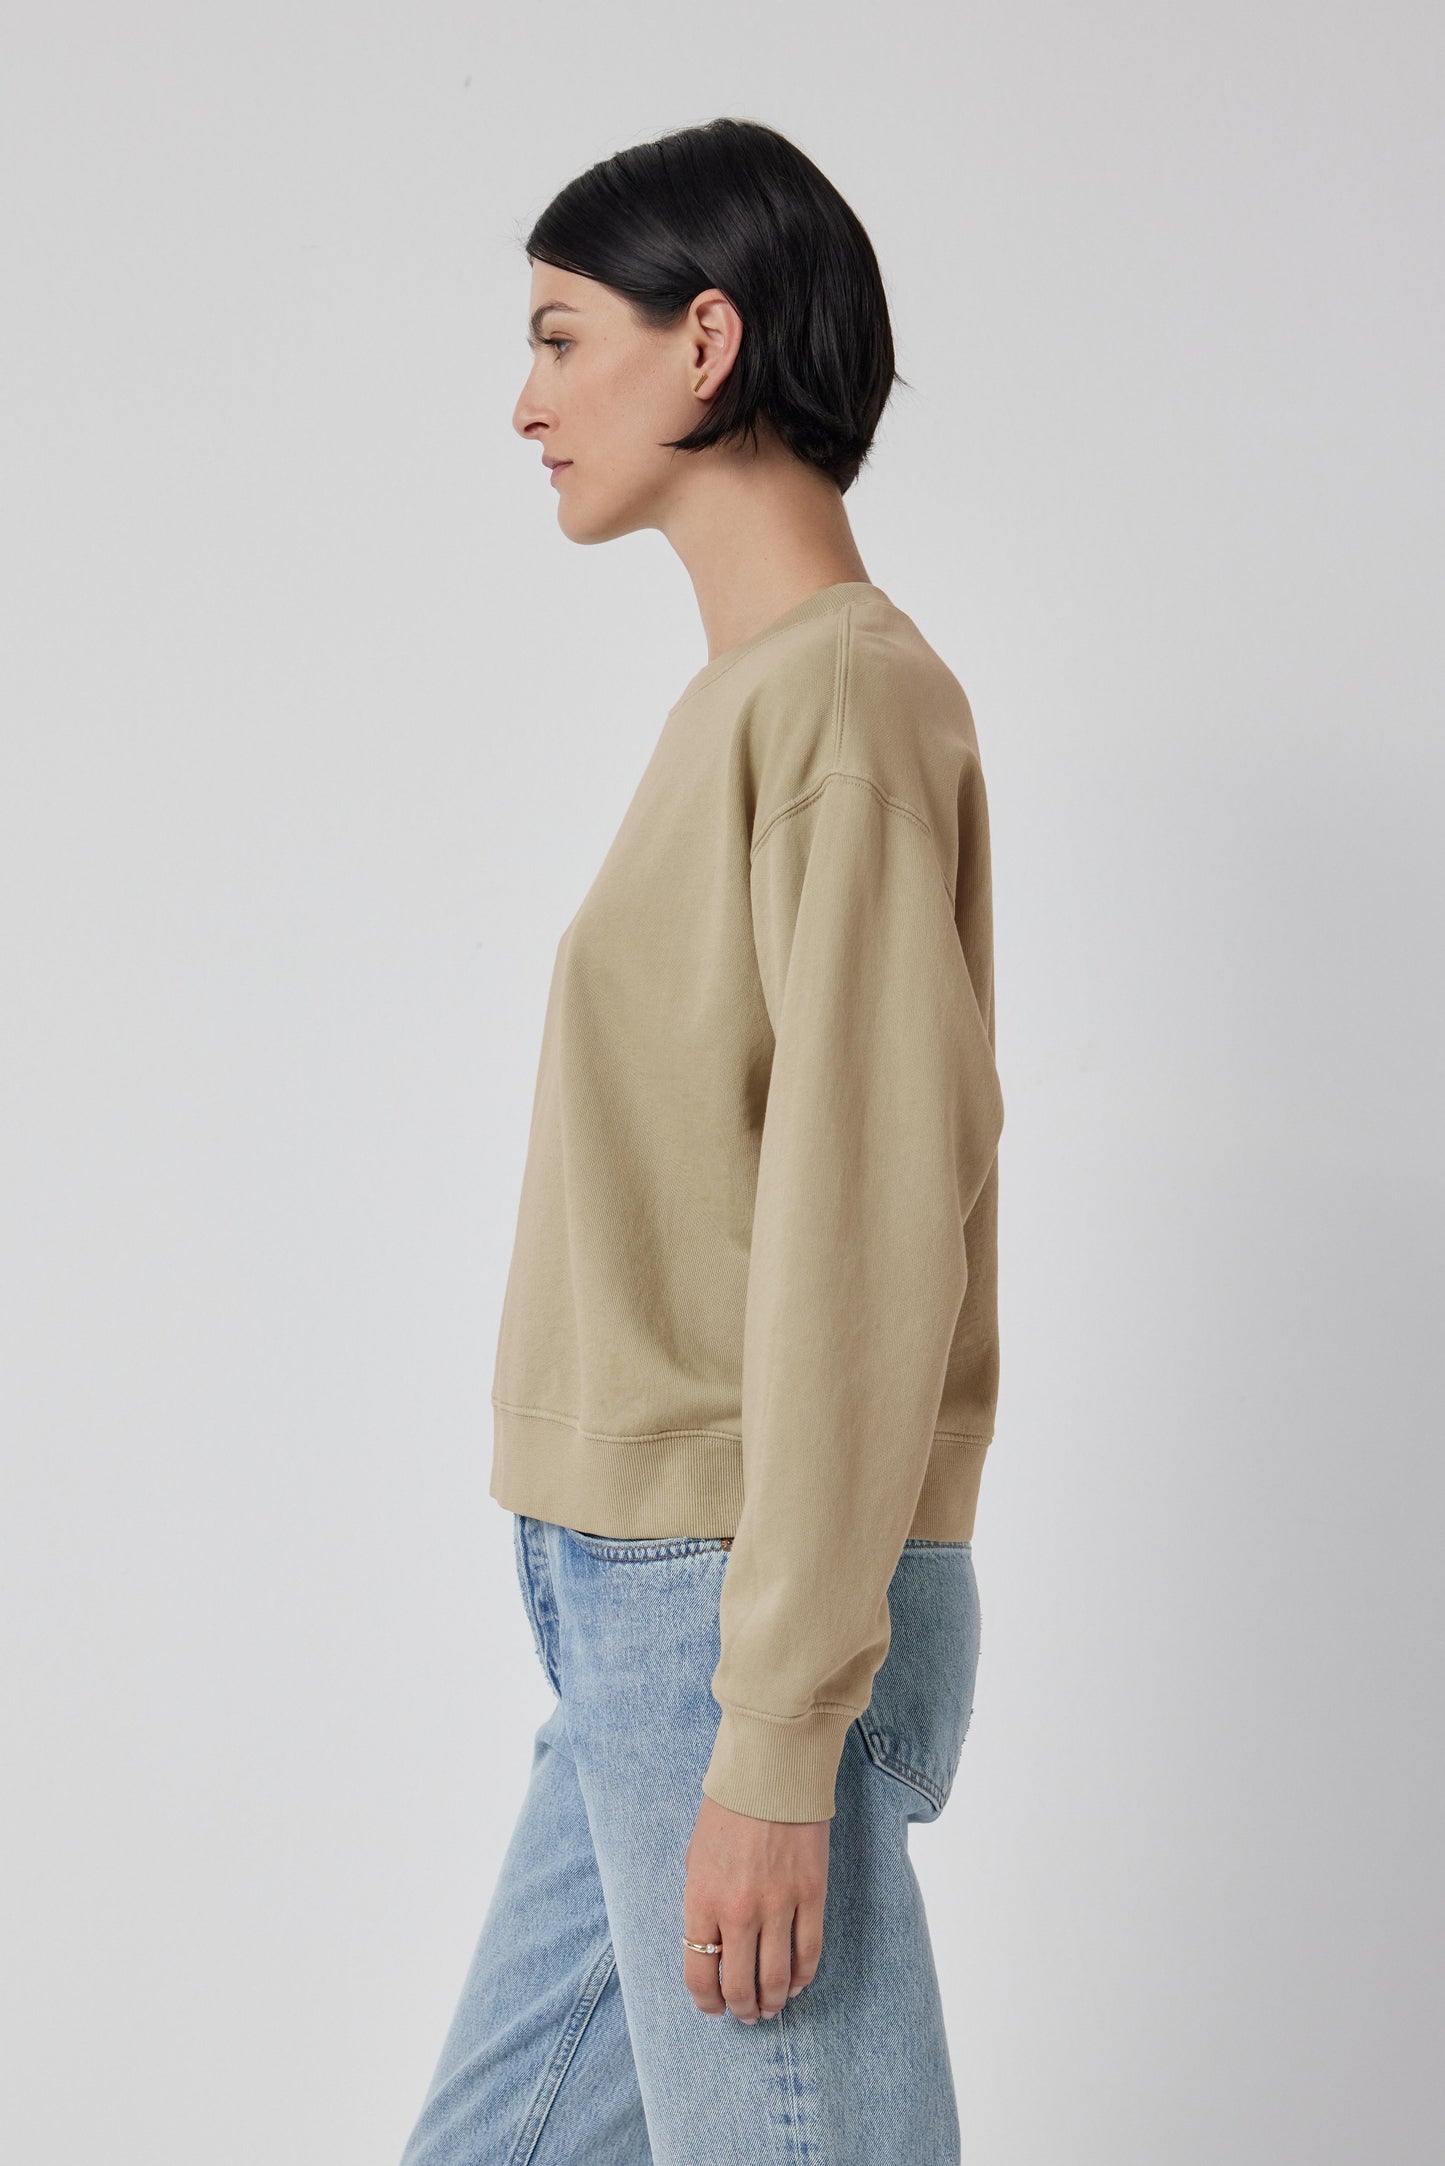 Side profile of a person wearing a Velvet by Jenny Graham Ynez sweatshirt made from organic fleece and blue jeans against a white background.-36463630811329